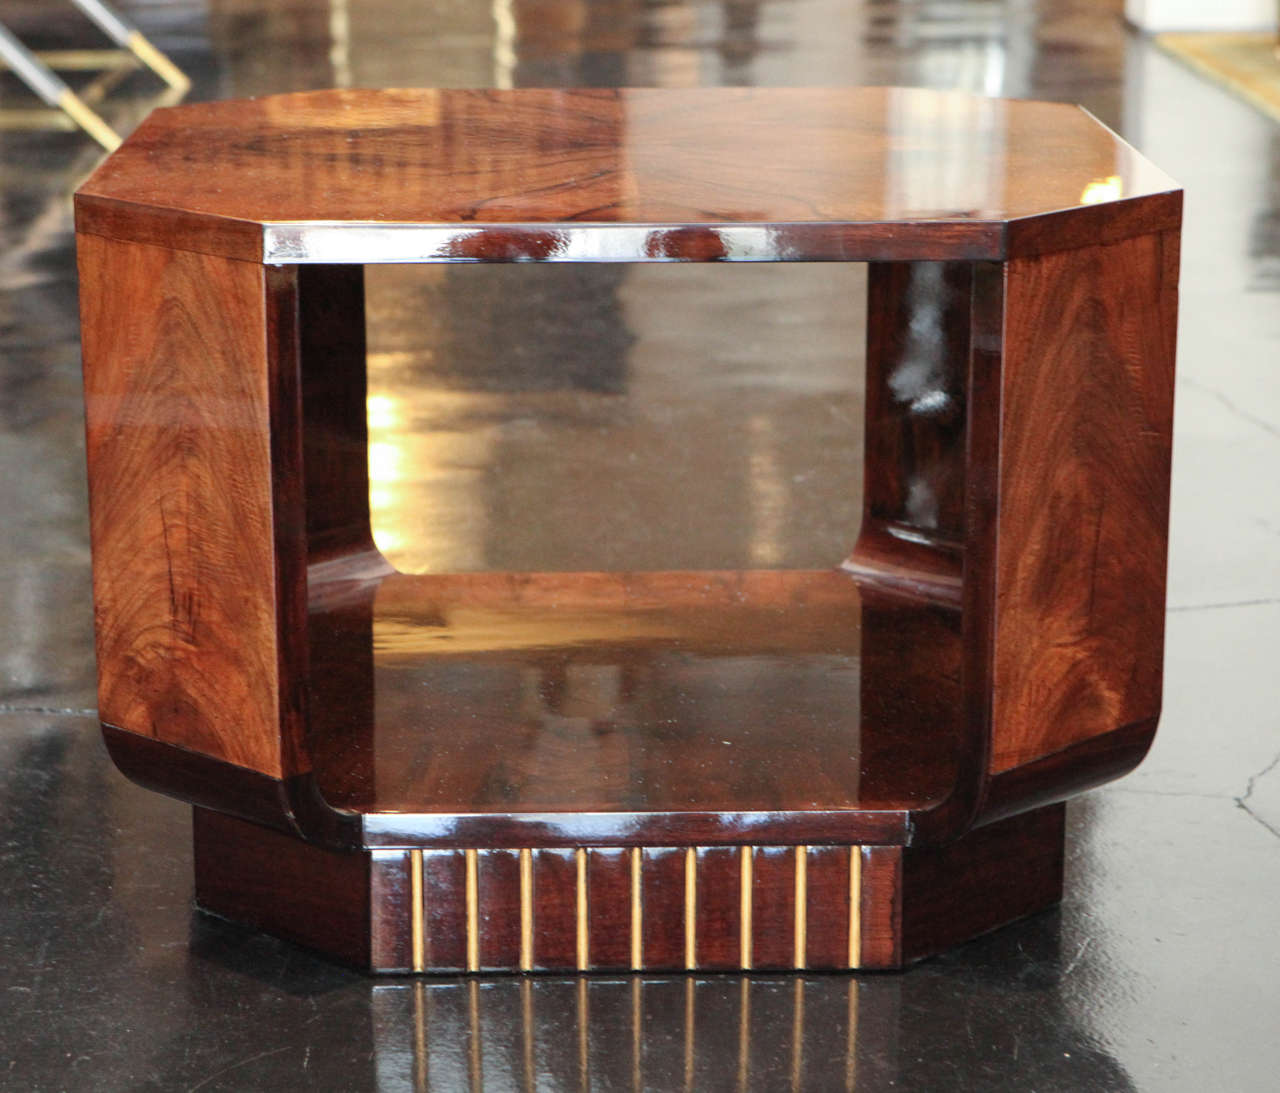 Side table in mirrored walnut burl on top and lower tier. Octagonal in shape with engraved linear detailing in gold leaf on base.